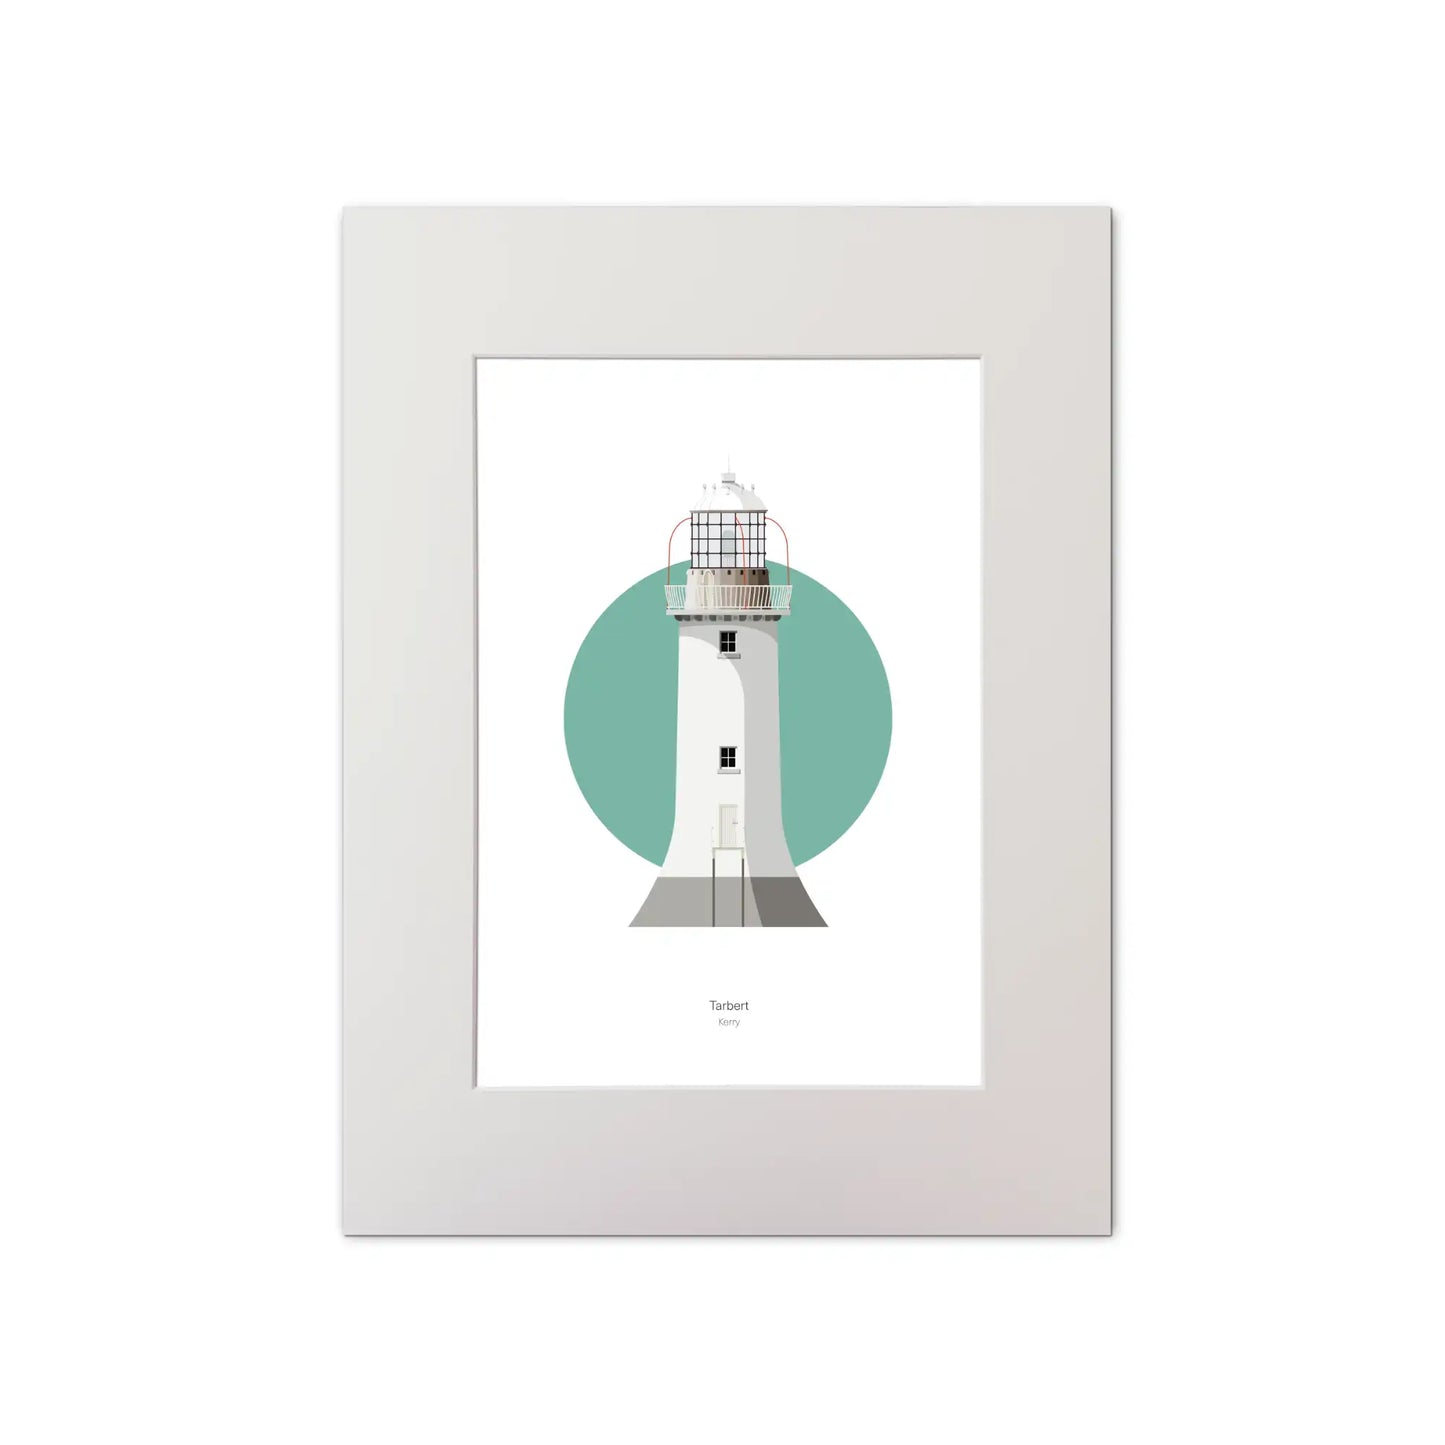 Contemporary graphic illustration of Tarbert lighthouse on a white background inside light blue square, mounted and measuring 30x40cm.